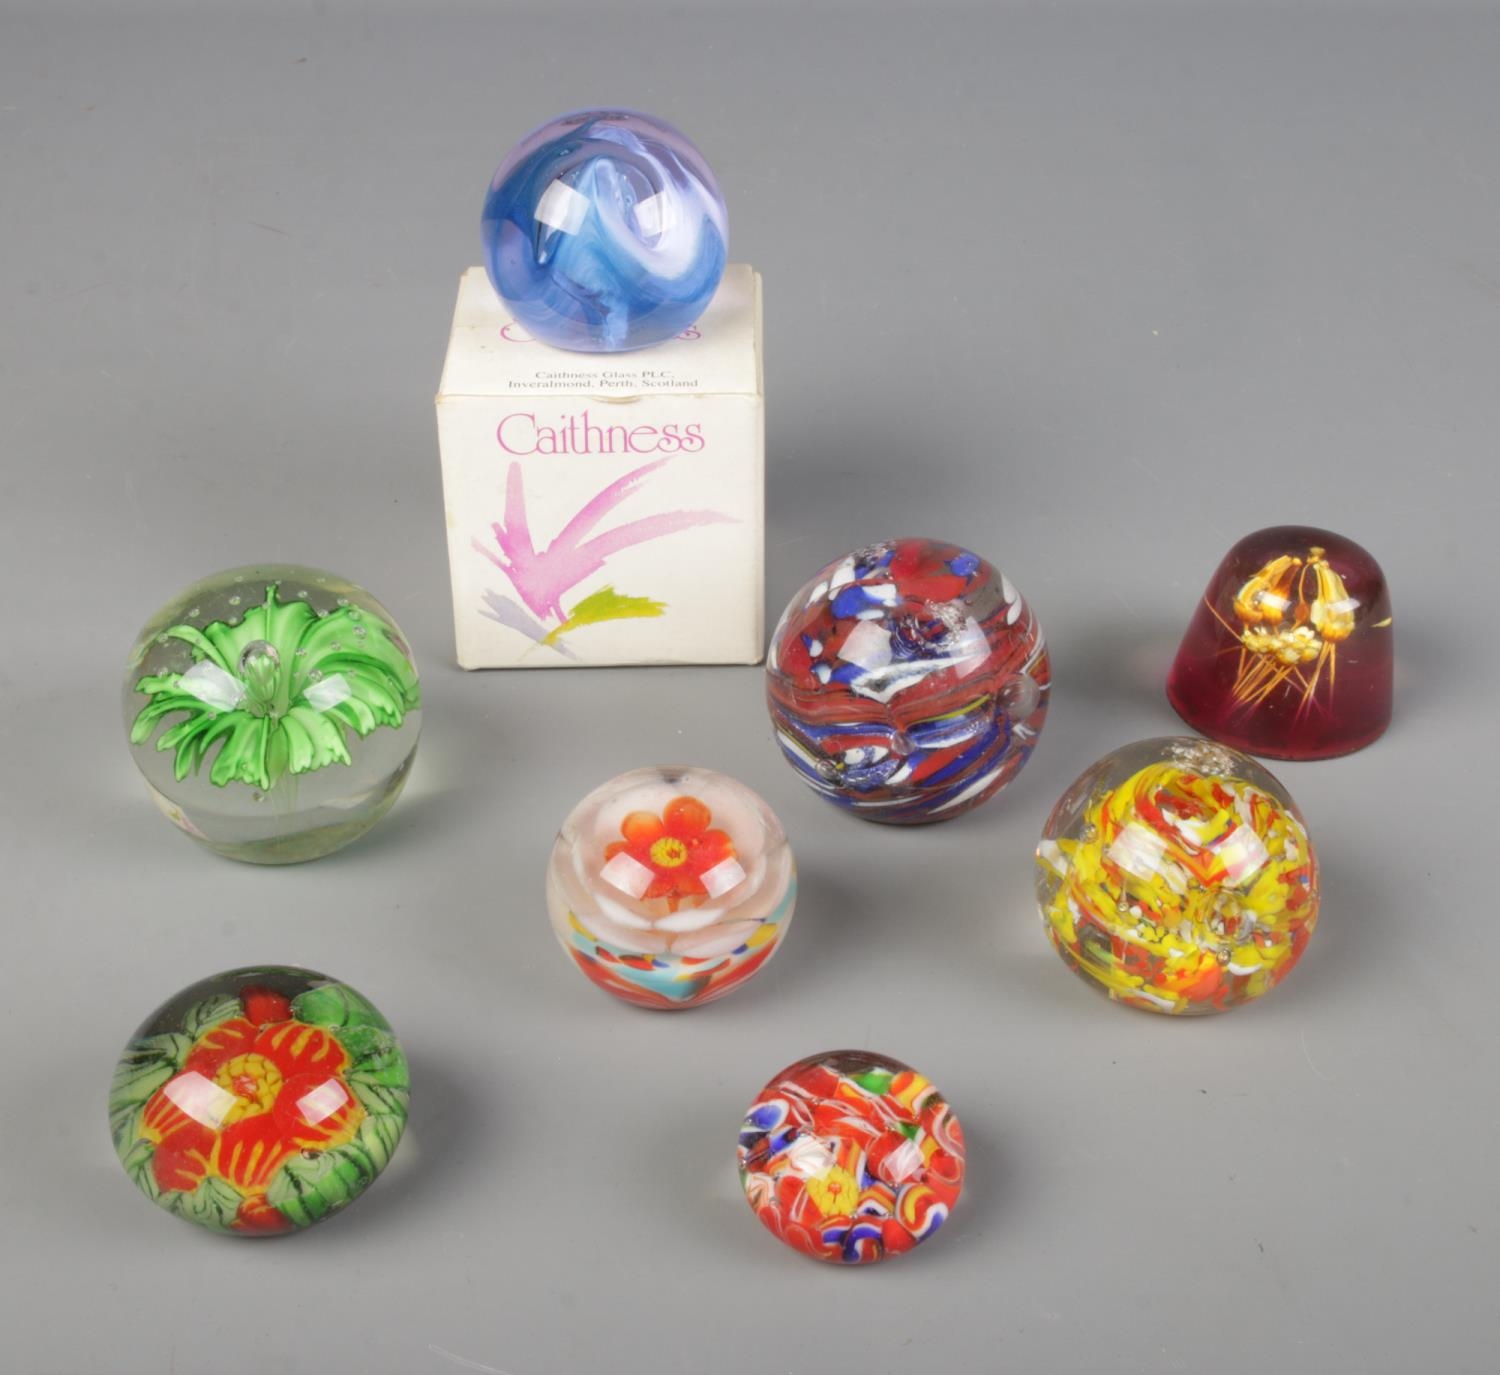 A collection of glass paper weights with one resin example and one boxed Caithness paperweight